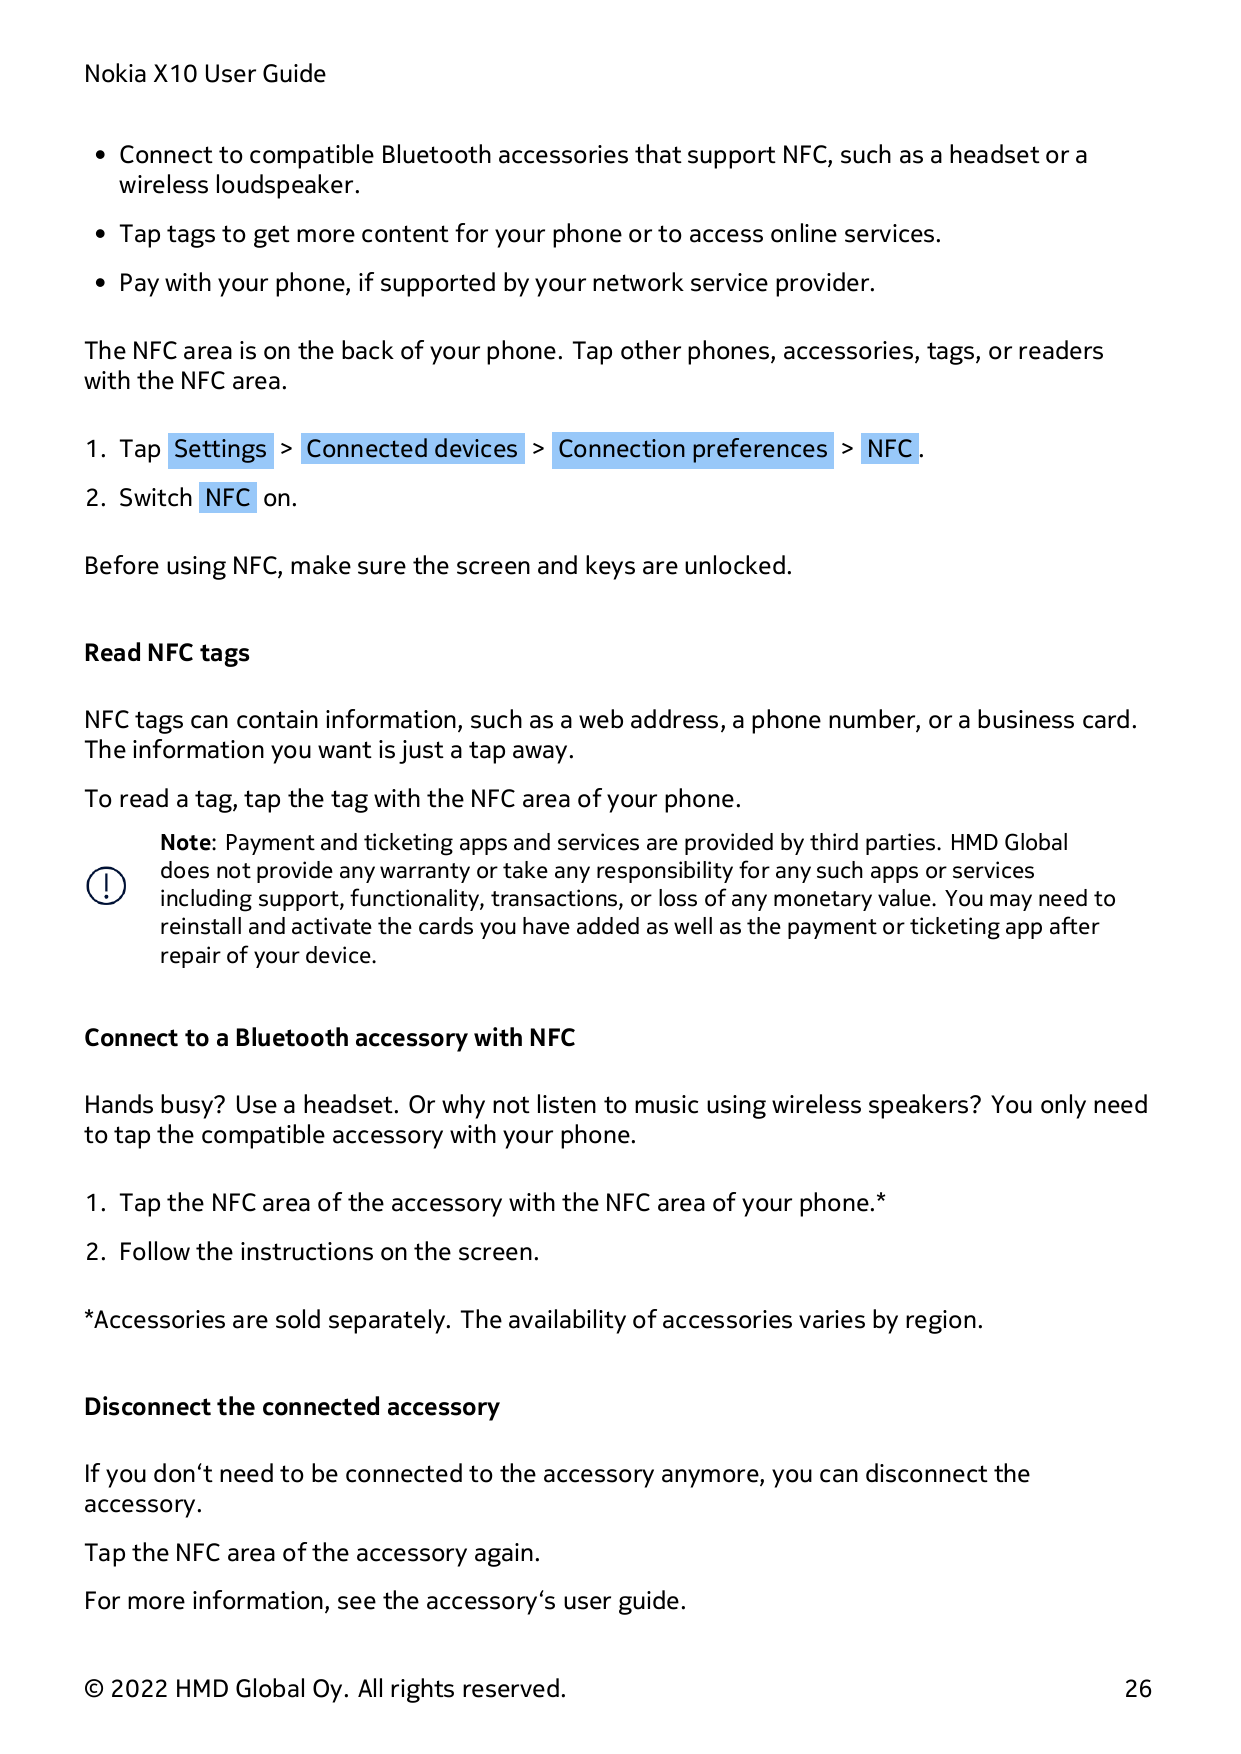 Nokia X10 User Guide• Connect to compatible Bluetooth accessories that support NFC, such as a headset or awireless loudspeaker.•